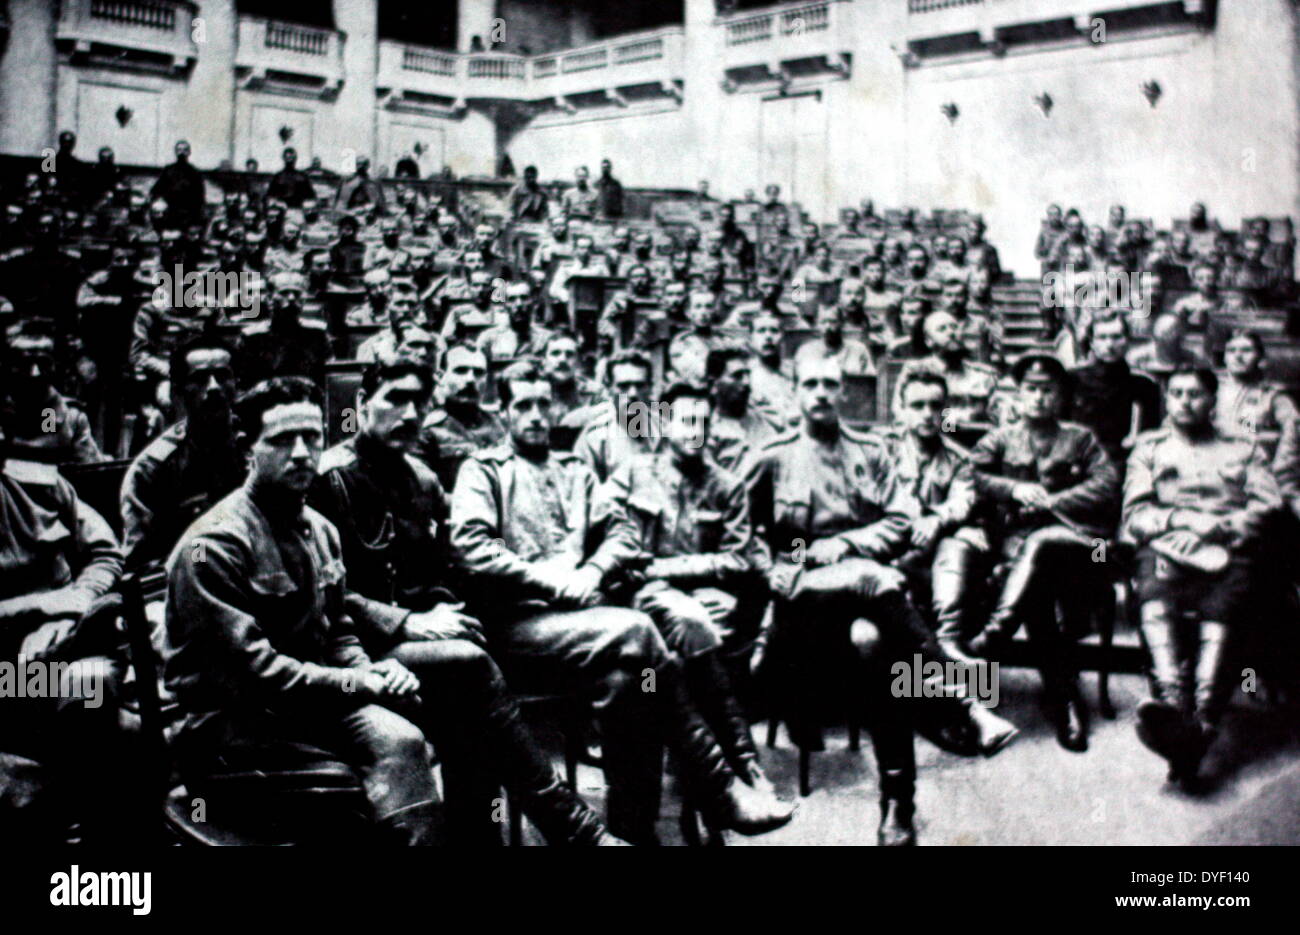 Meeting of the Petrograd Soviet of Soldiers Deputies in the Duma, Russia circa 1917. Formed by the socialists in St. Petersburg following the workers strike in March 1917. The Council formed an uneasy alliance with the, then provisional government. Stock Photo